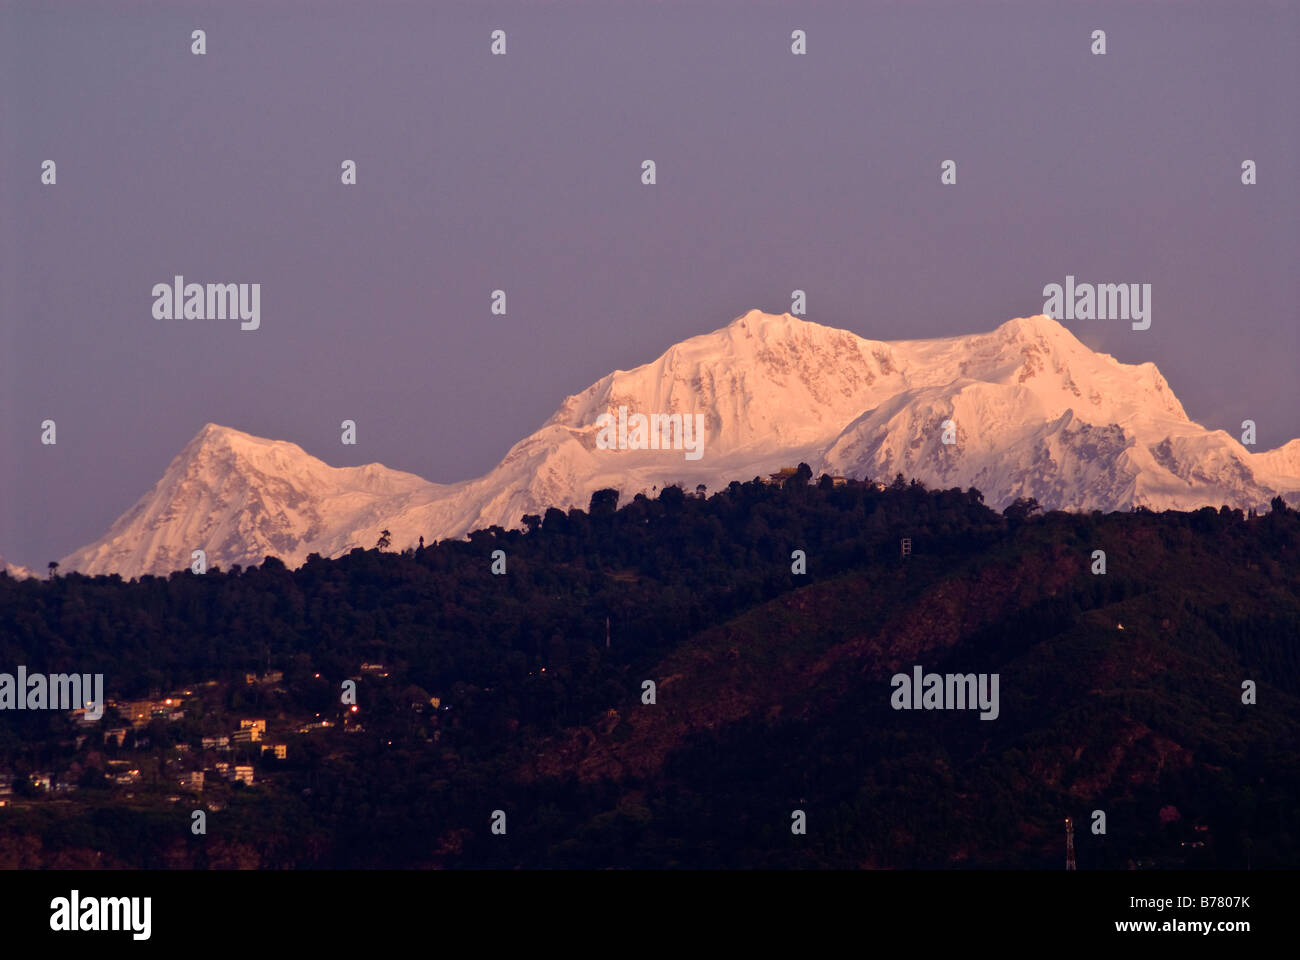 Peaks of the Kangchenjunga mountain range, Sikkim, at dawn, with Geyzing town in the left foreground Stock Photo